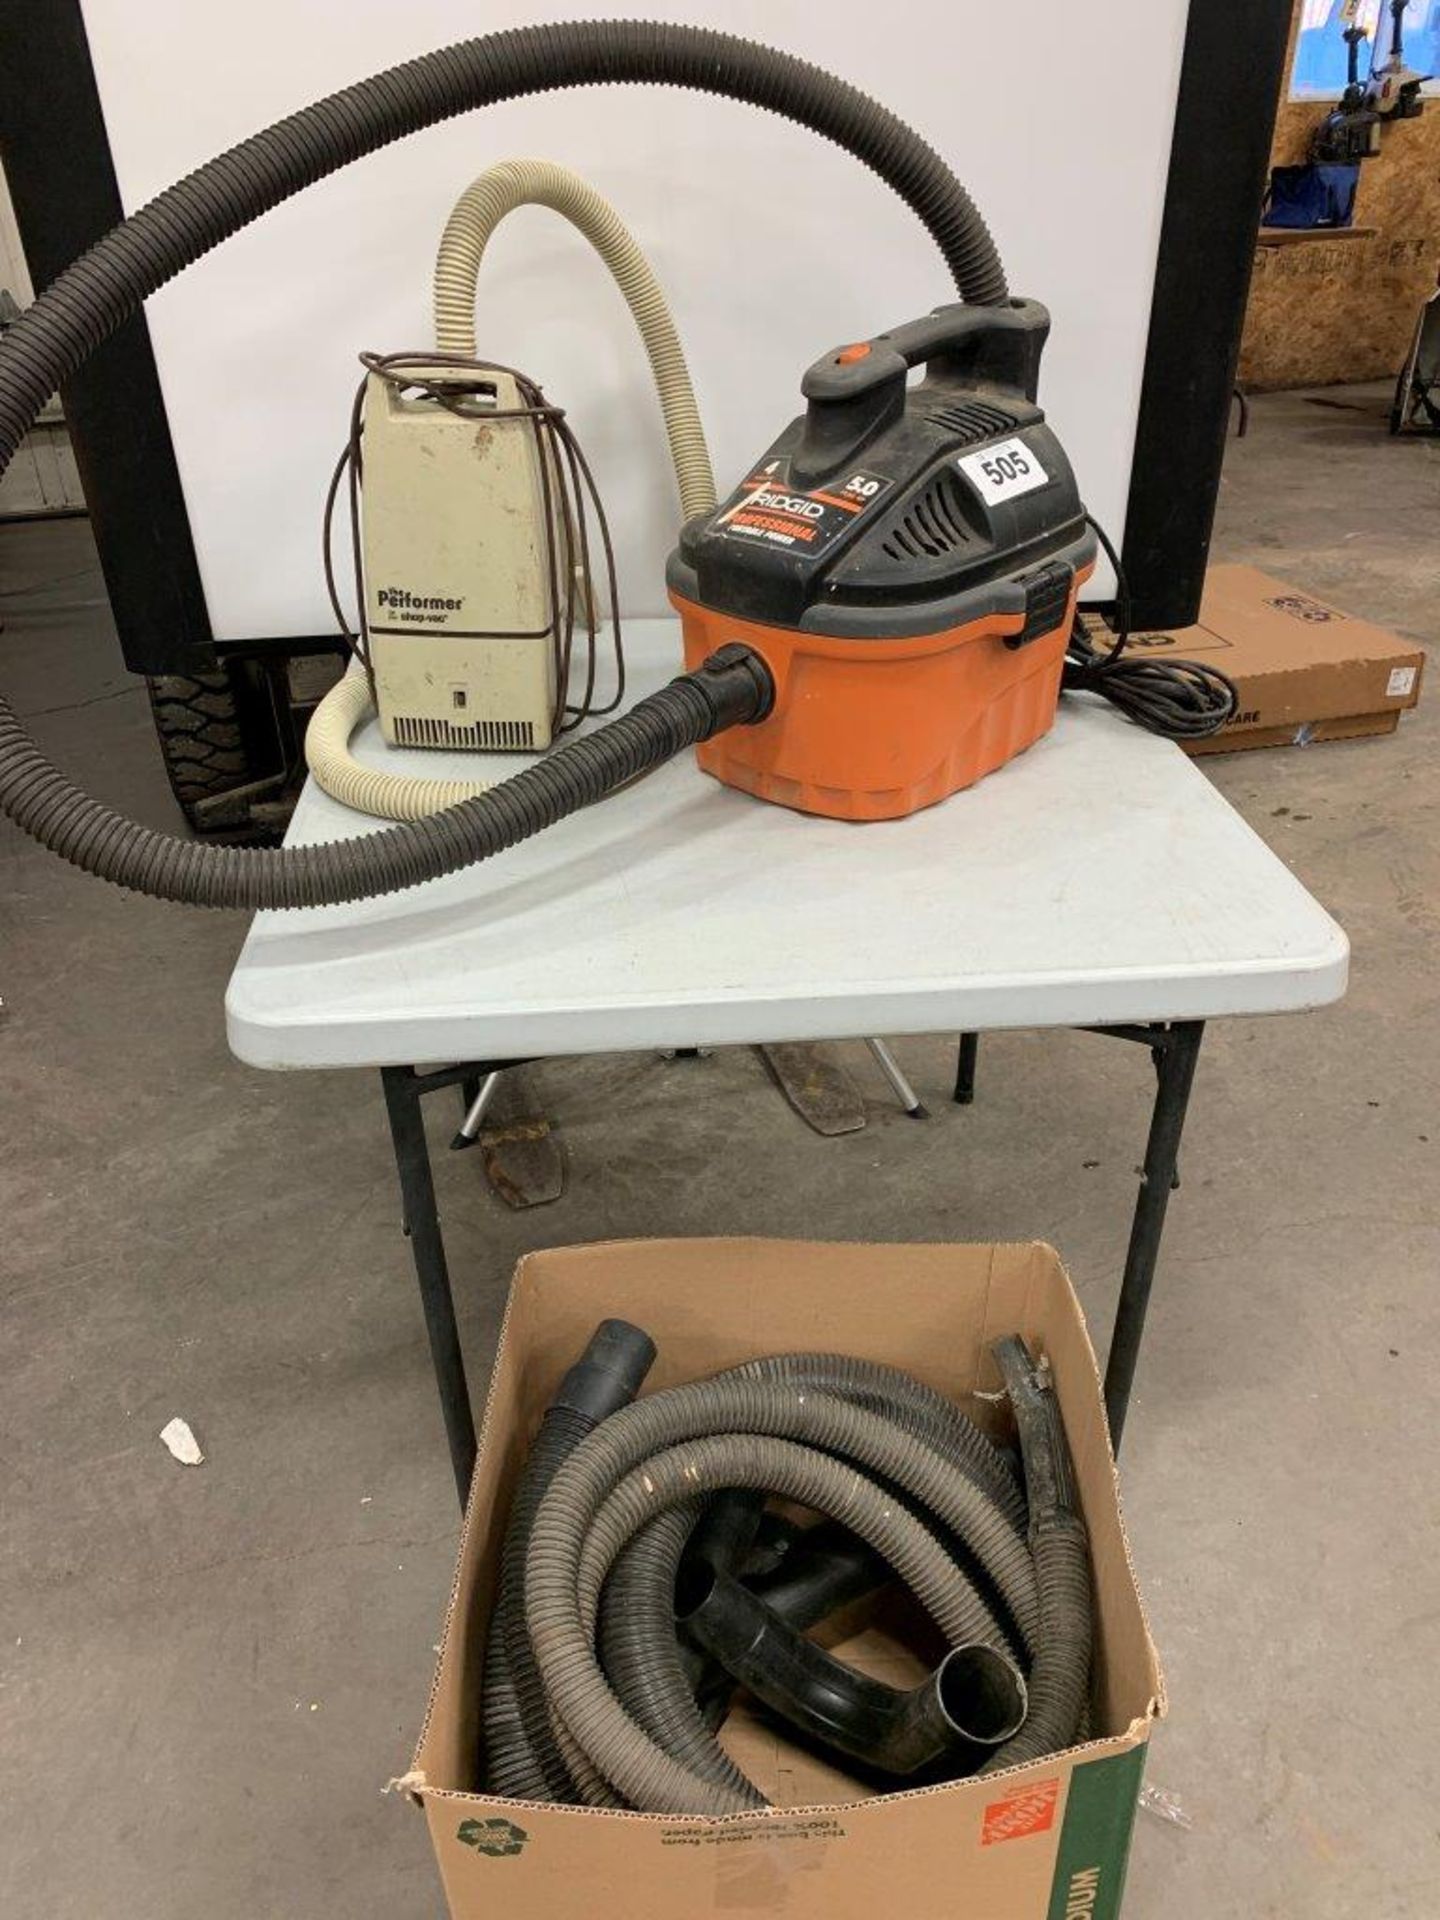 RIDGID PORTABLE WE/DRY SHOP VACUUM W/ ATTACHMENTS AND PERFORMER VACUUM - Image 2 of 6